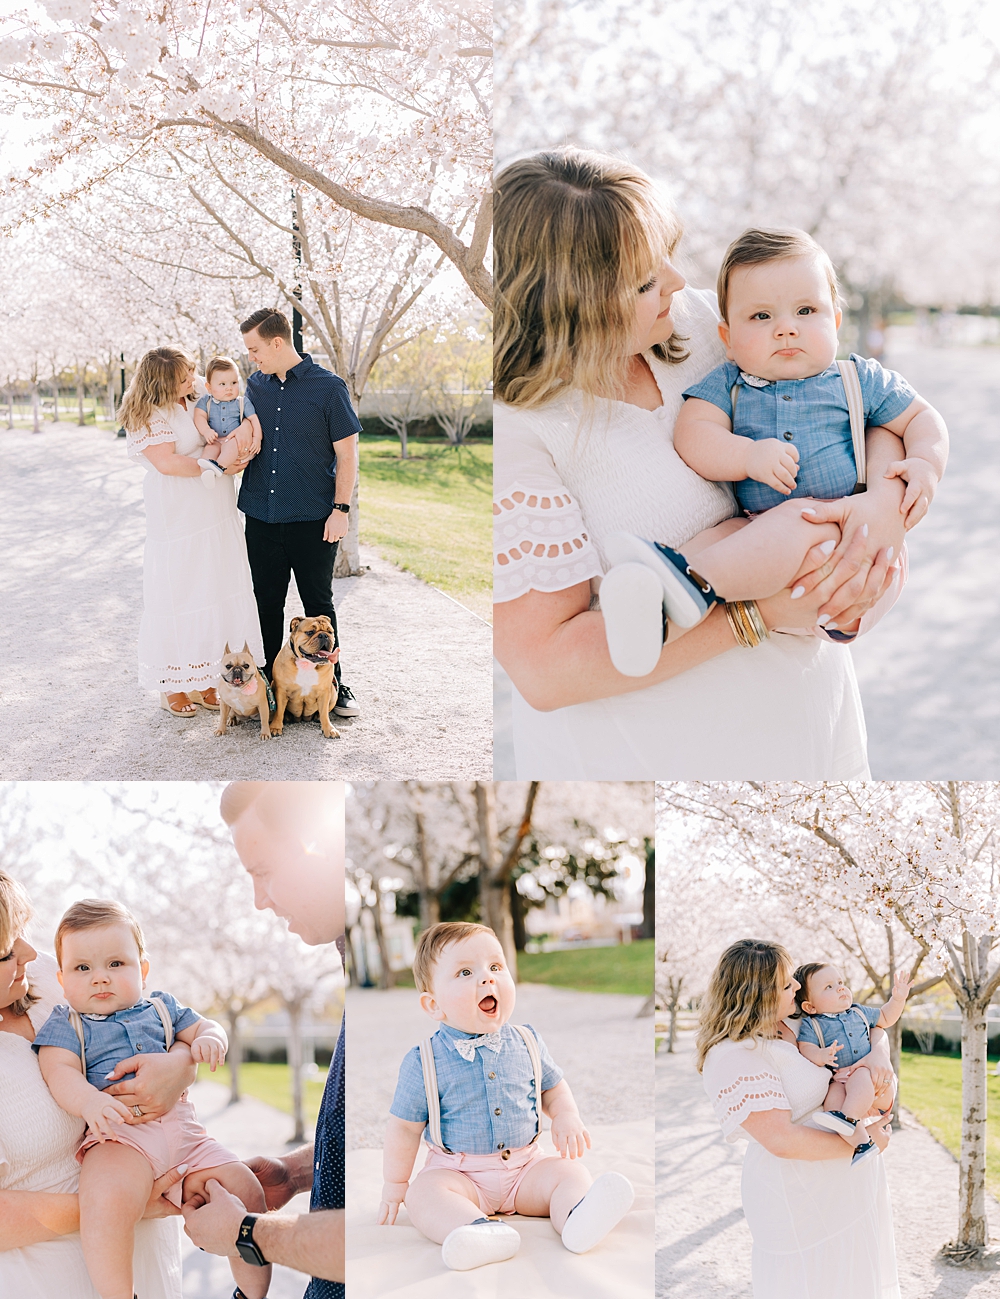 Everything you need to know about shooting at the Utah State Capitol Cherry Blossoms | Utah Family Photographer